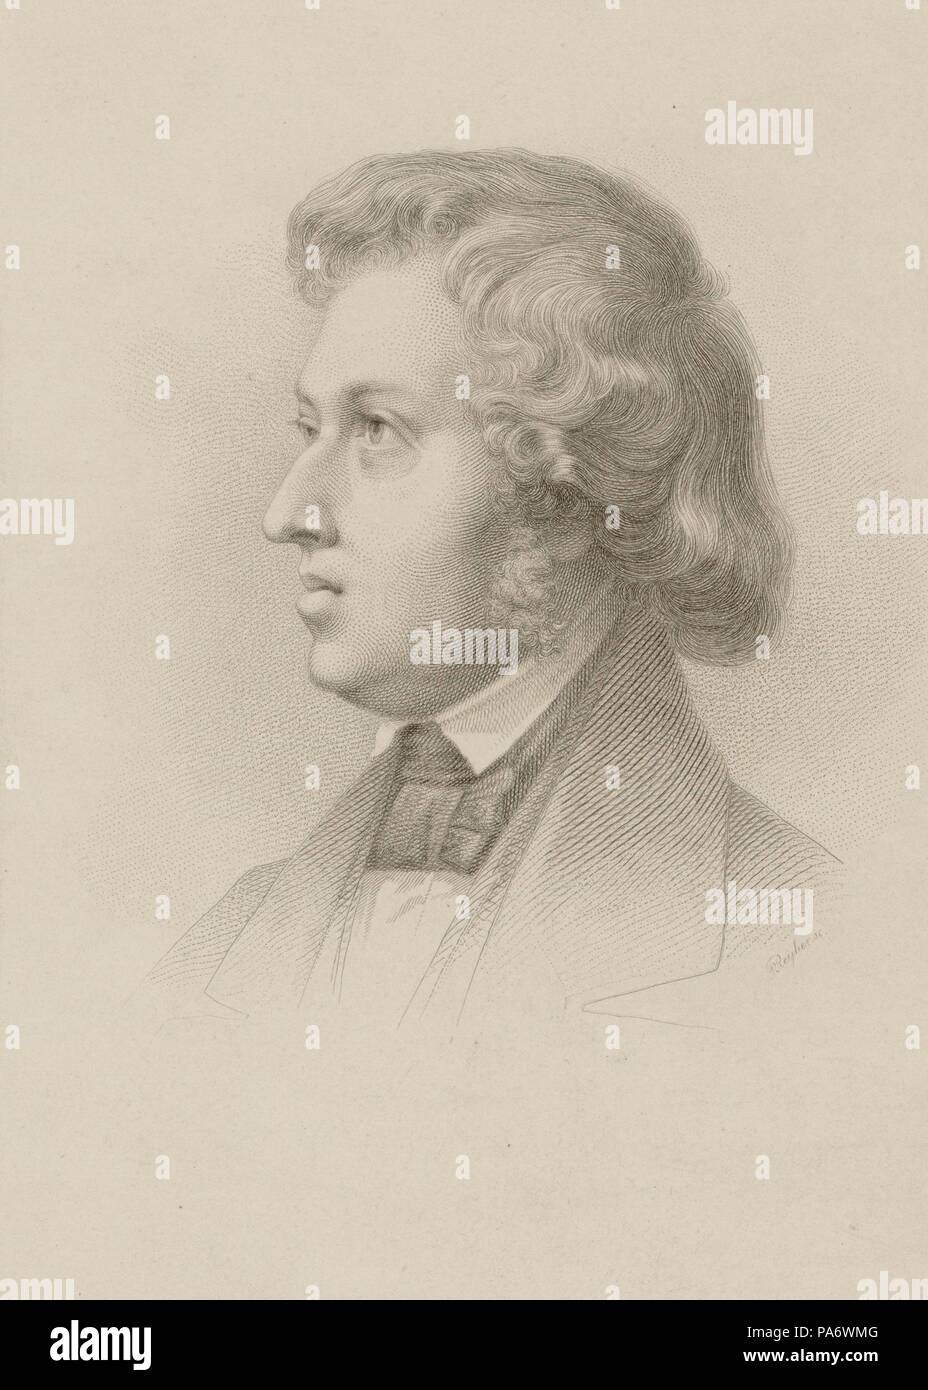 Portrait of the composer Frédéric Chopin (1810-1849). Museum: PRIVATE COLLECTION. Stock Photo